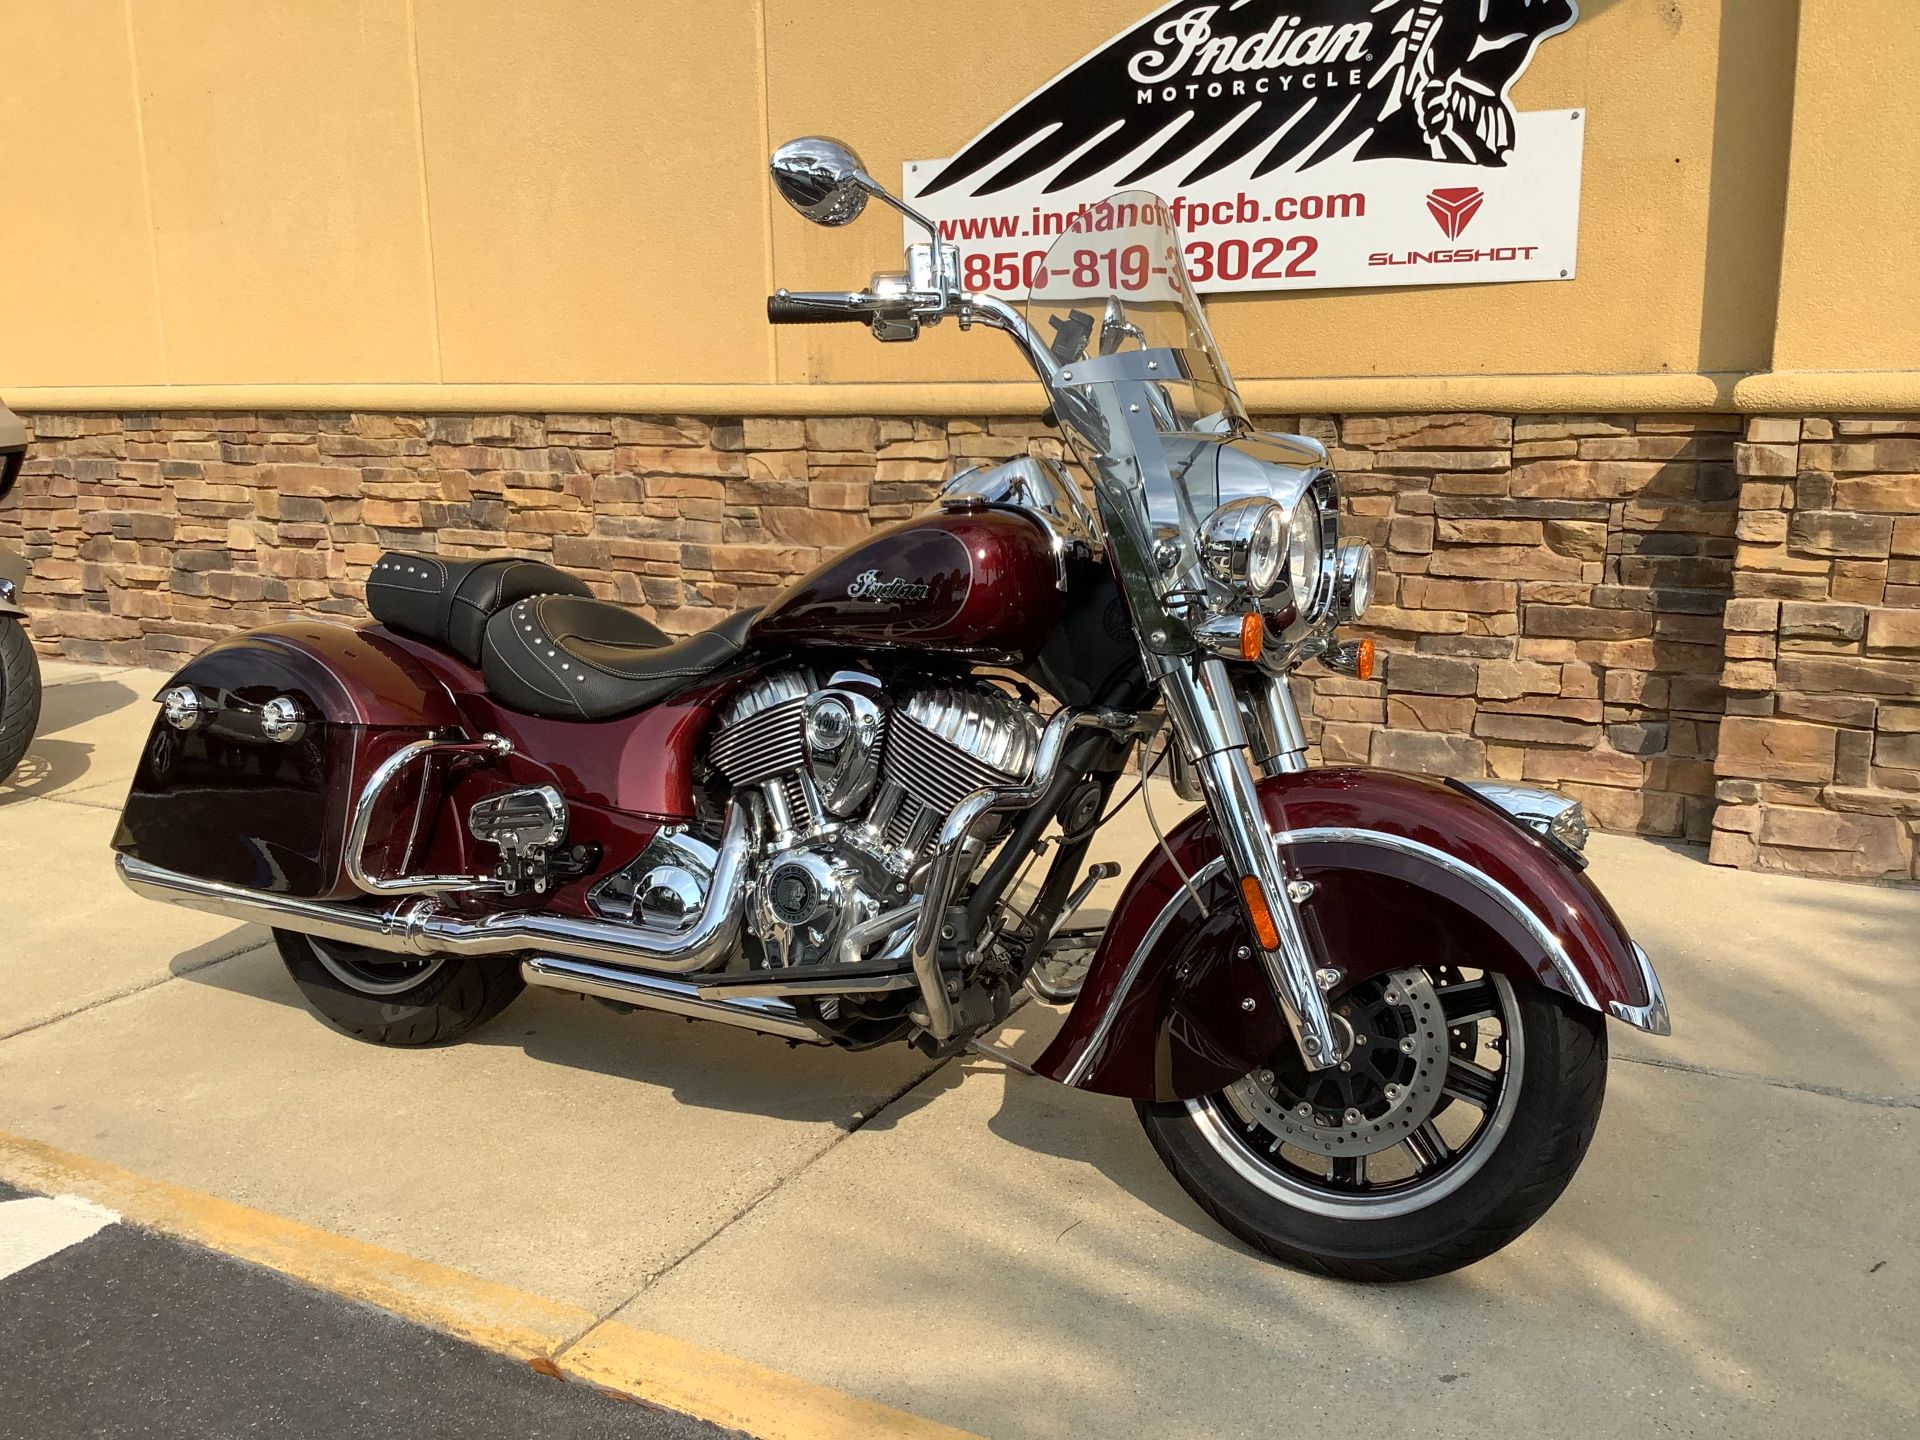 2021 Indian Motorcycle SPRINGFIELD TWO TONE in Panama City Beach, Florida - Photo 2